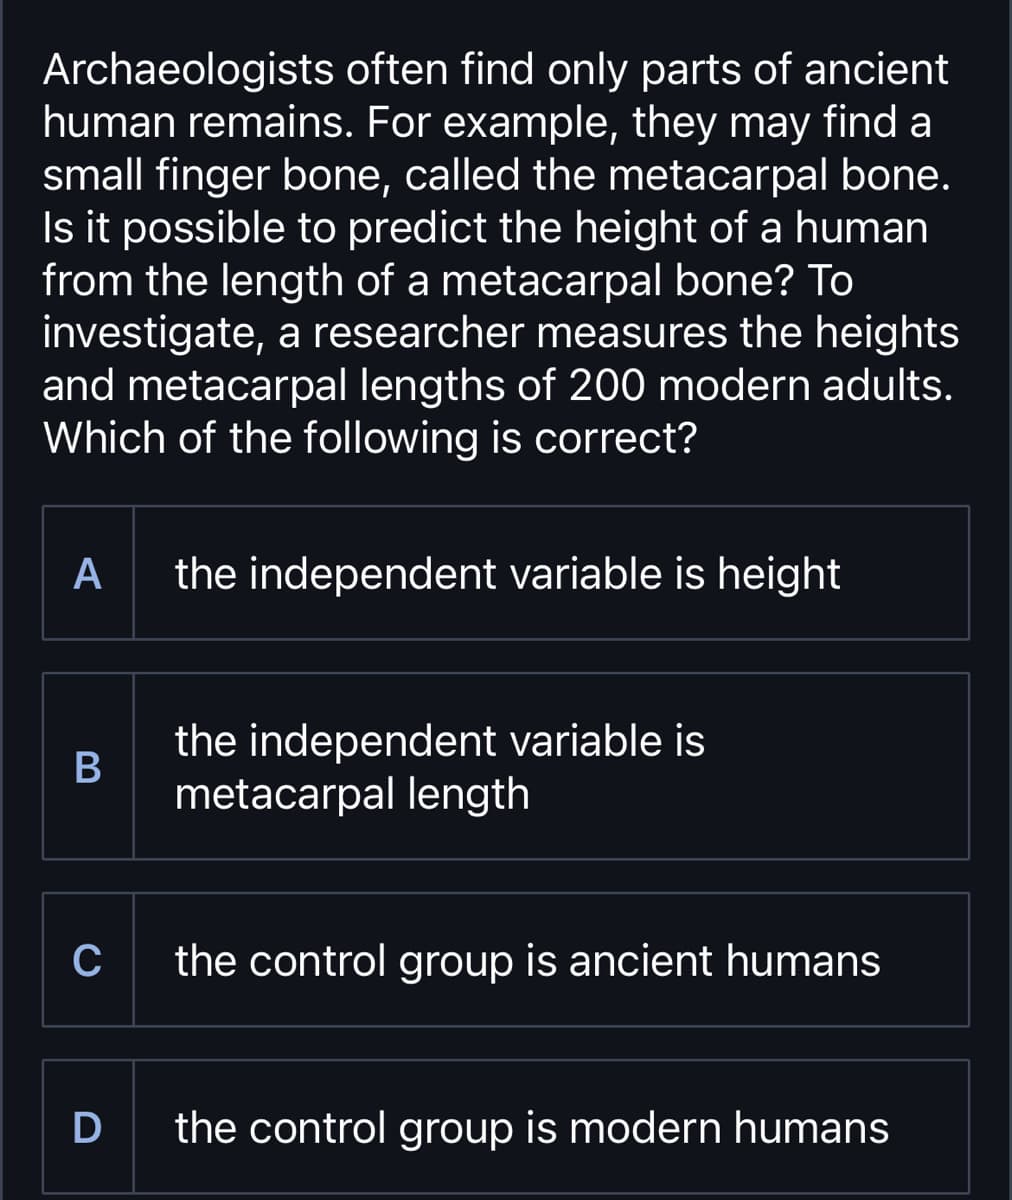 Archaeologists often find only parts of ancient
human remains. For example, they may find a
small finger bone, called the metacarpal bone.
Is it possible to predict the height of a human
from the length of a metacarpal bone? To
investigate, a researcher measures the heights
and metacarpal lengths of 200 modern adults.
Which of the following is correct?
A
the independent variable is height
B
the independent variable is
metacarpal length
C
the control group is ancient humans
D
the control group is modern humans